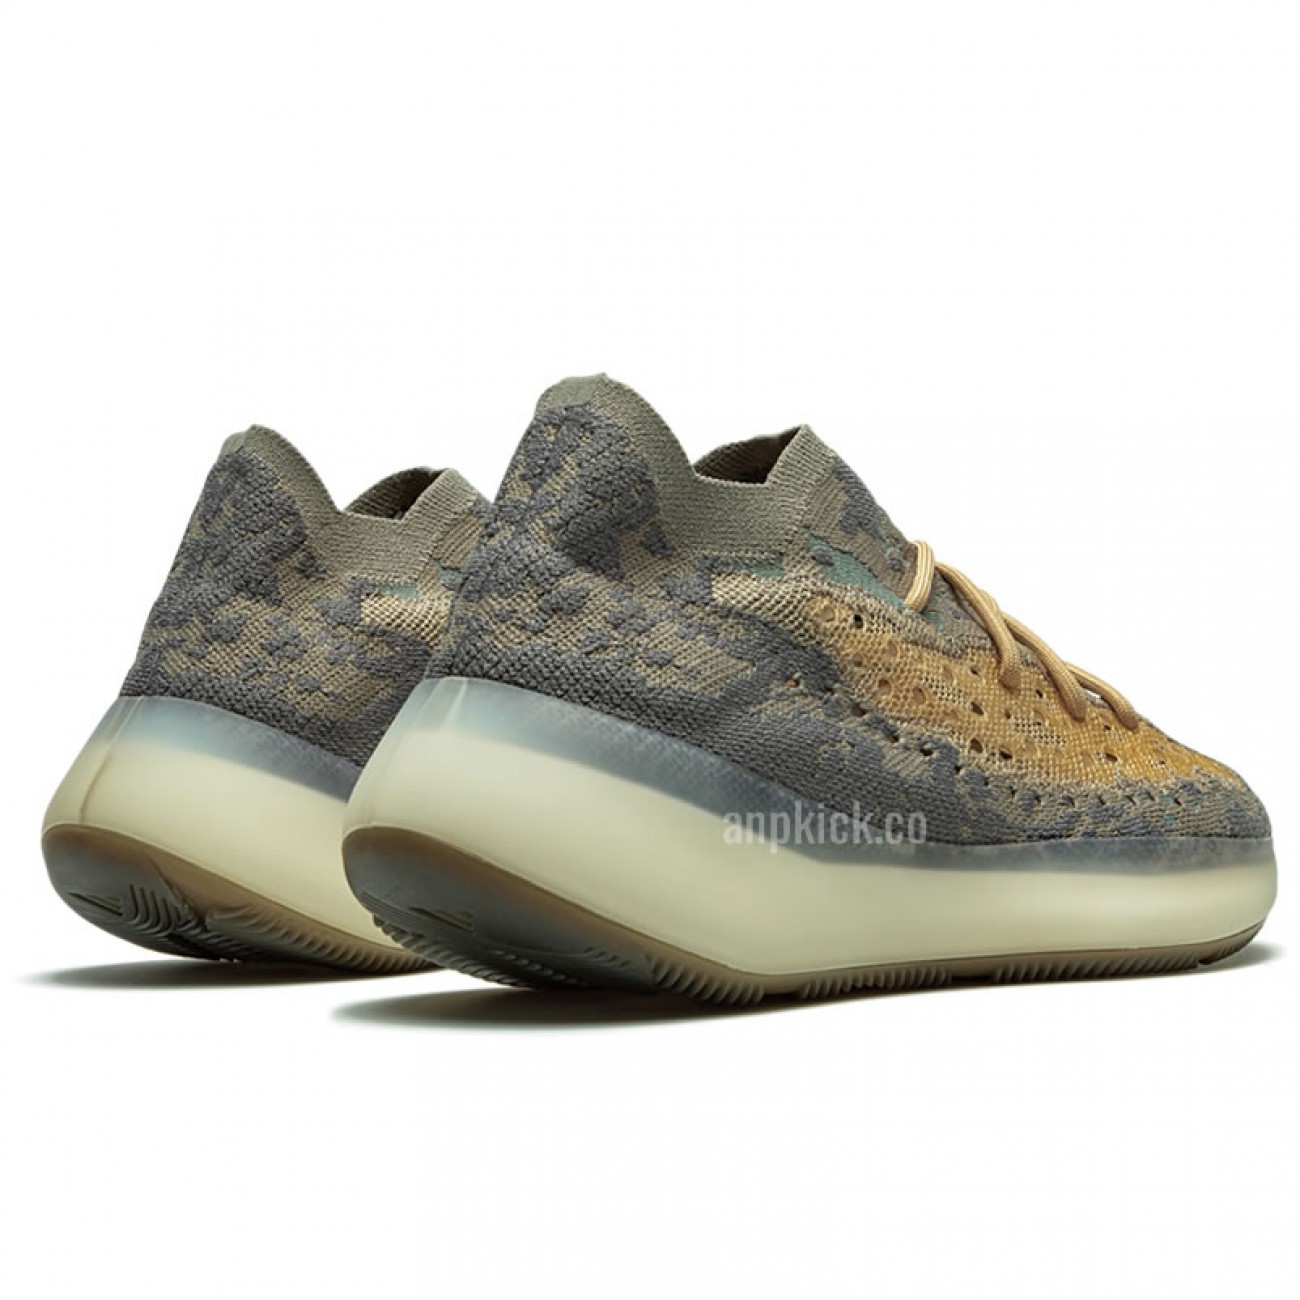 adidas Yeezy Boost 380 "Mist" Non-Reflective FX9764 New Release Date